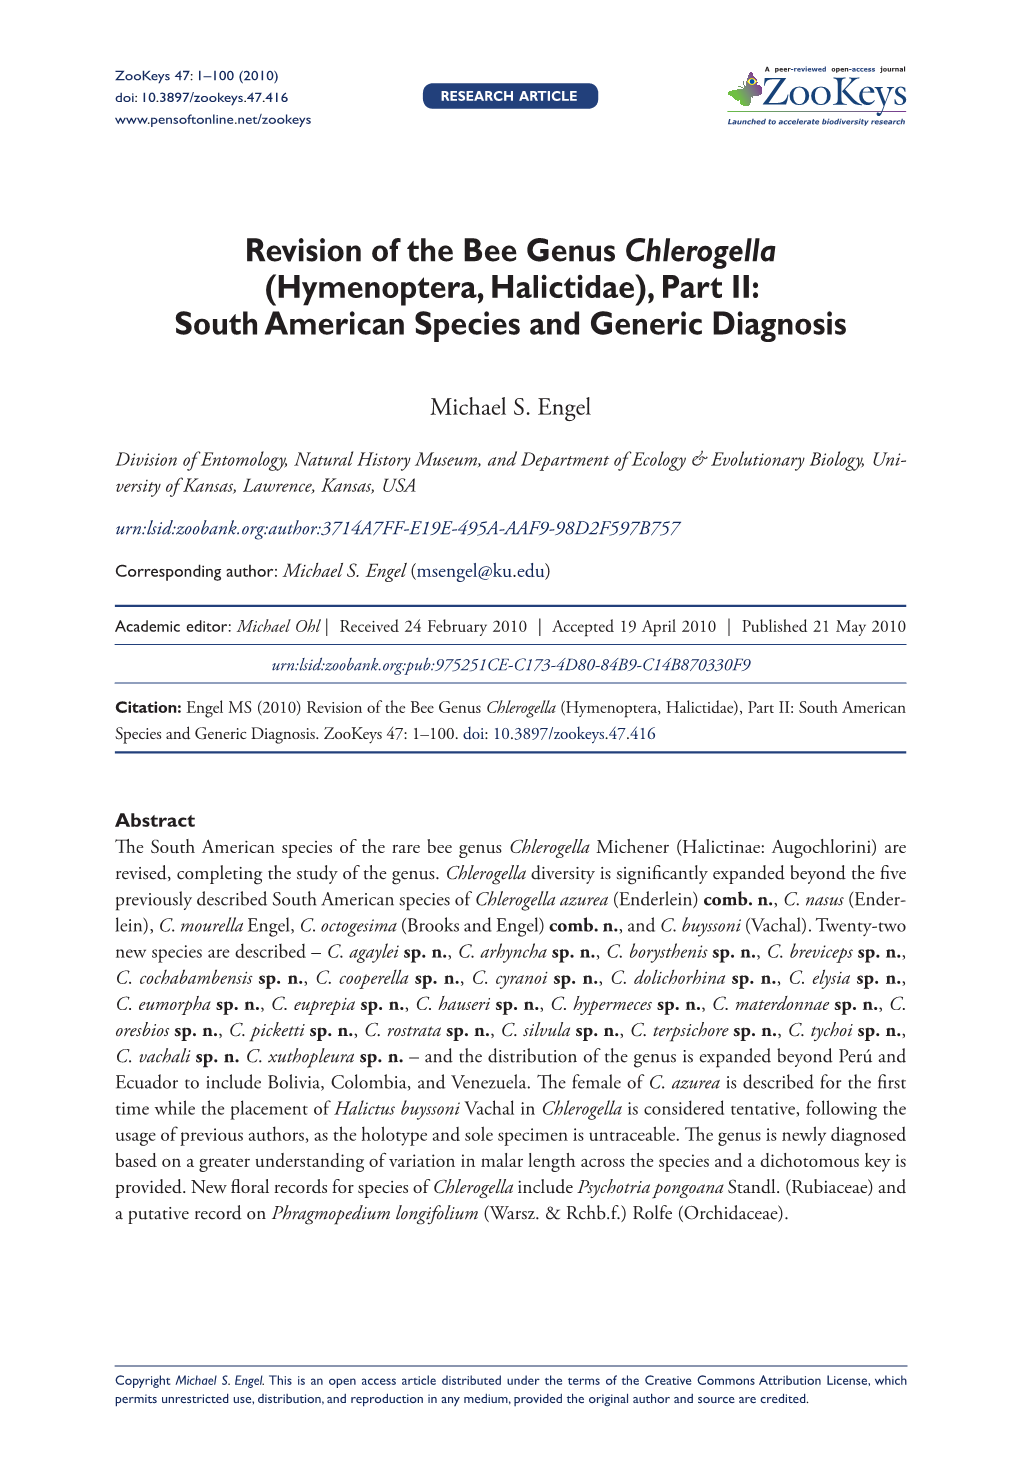 Revision of the Bee Genus Chlerogella (Hymenoptera, Halictidae), Part II: South American Species and Generic Diagnosis